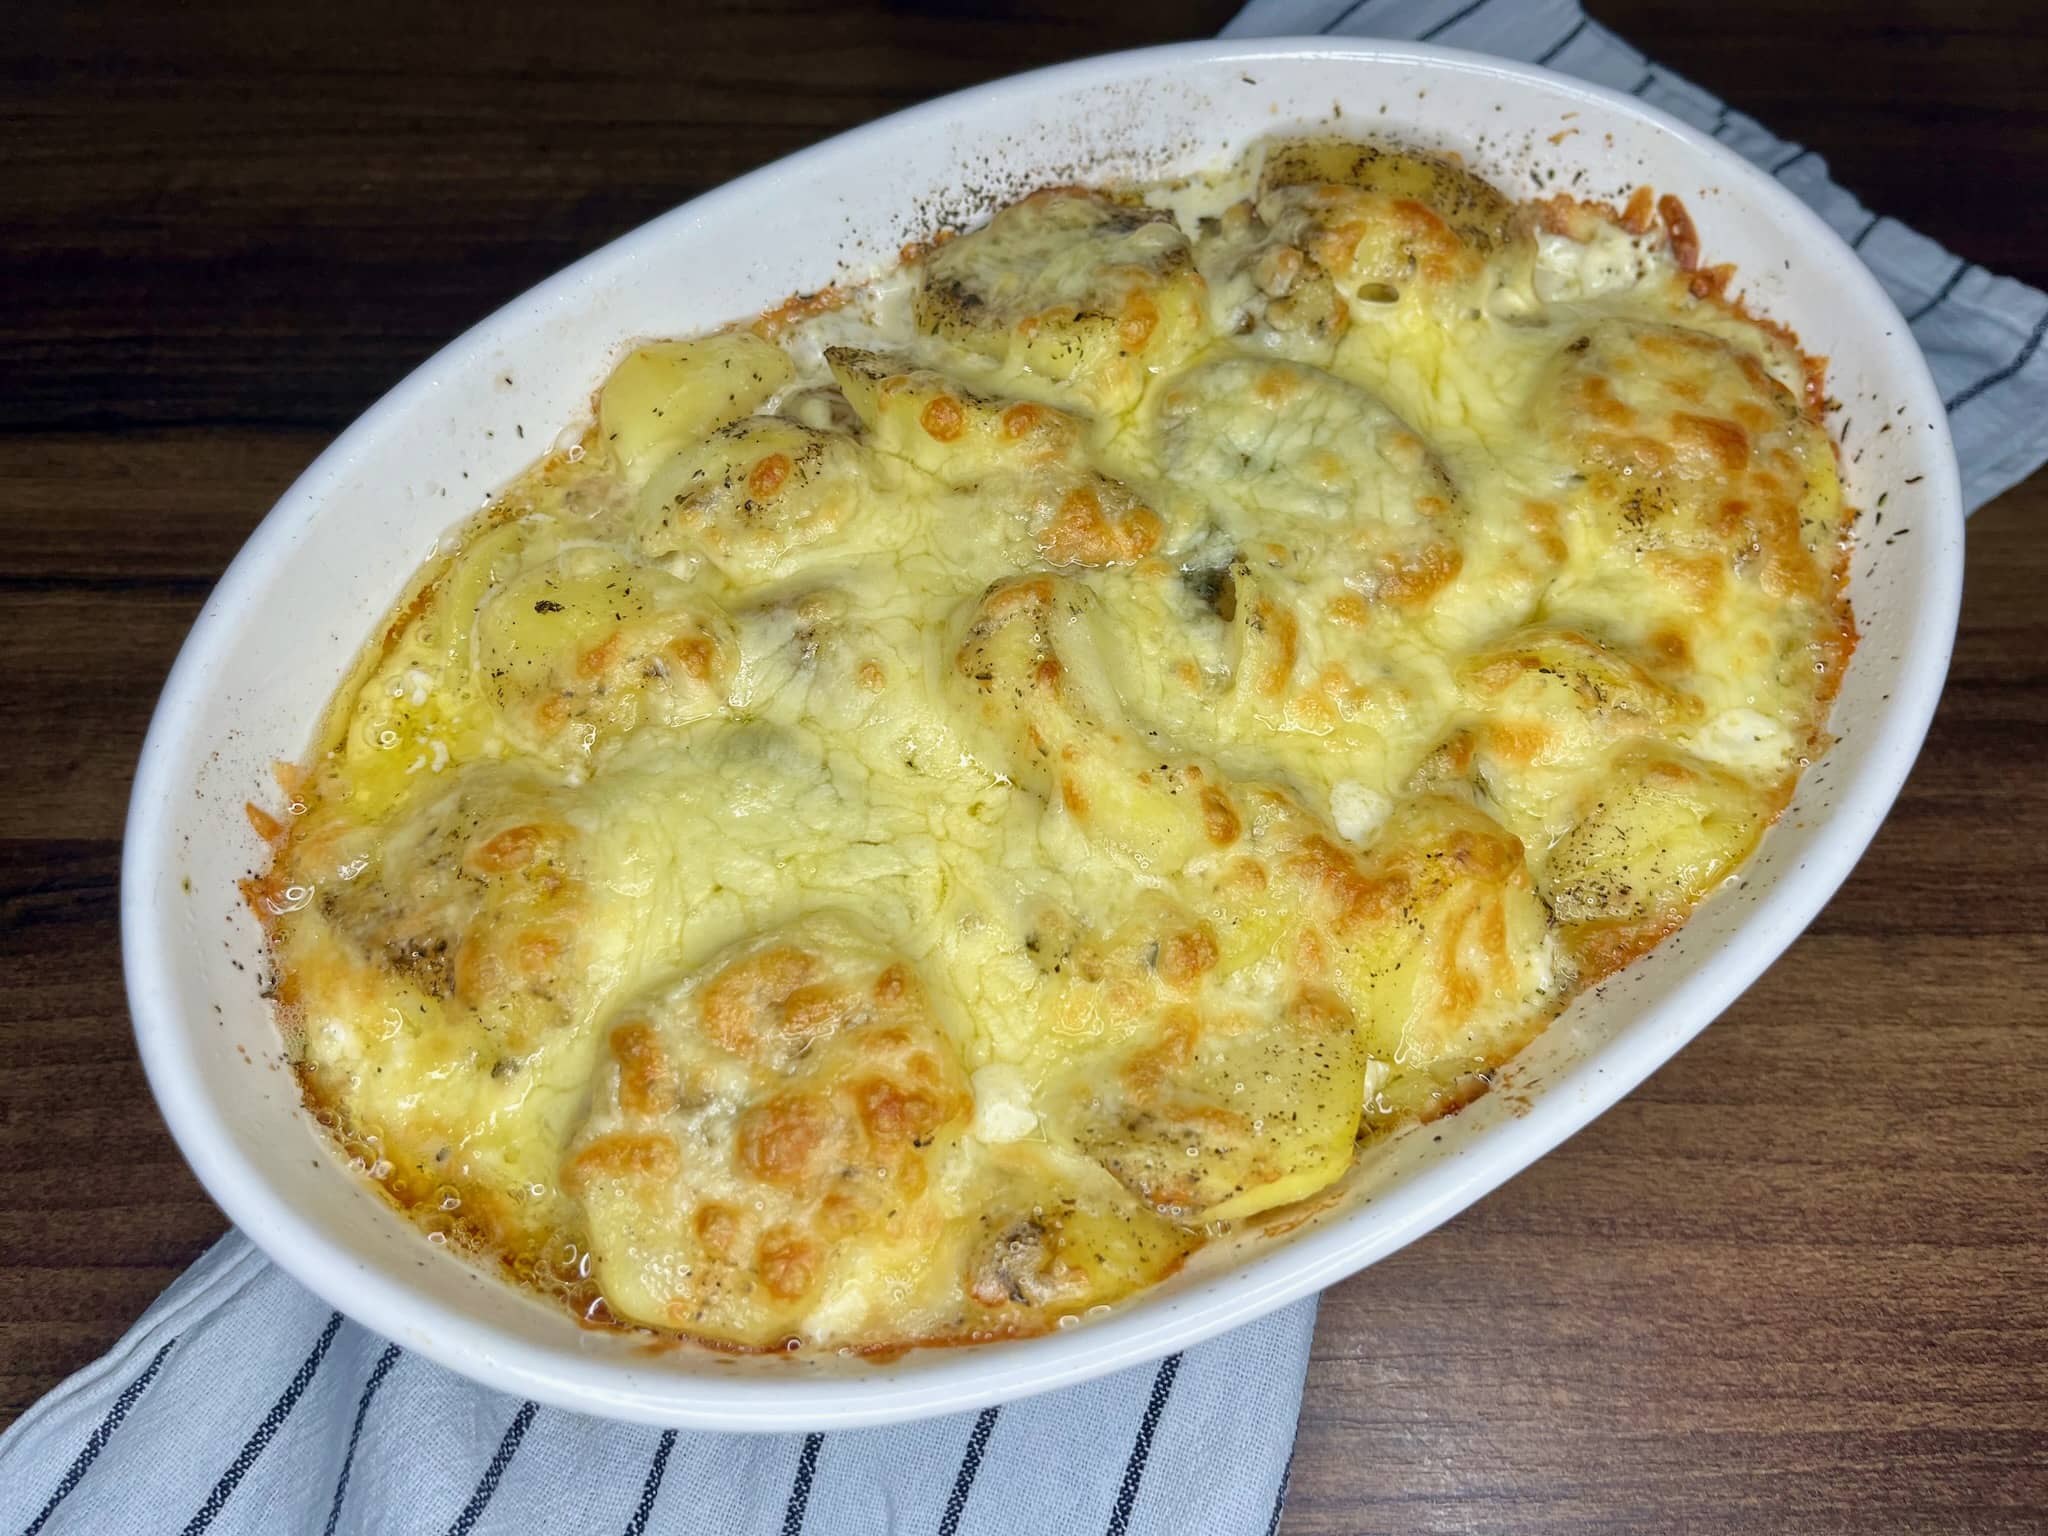 Nicely baked Cheesy Baked Potatoes with Pancetta in an ovenproof dish